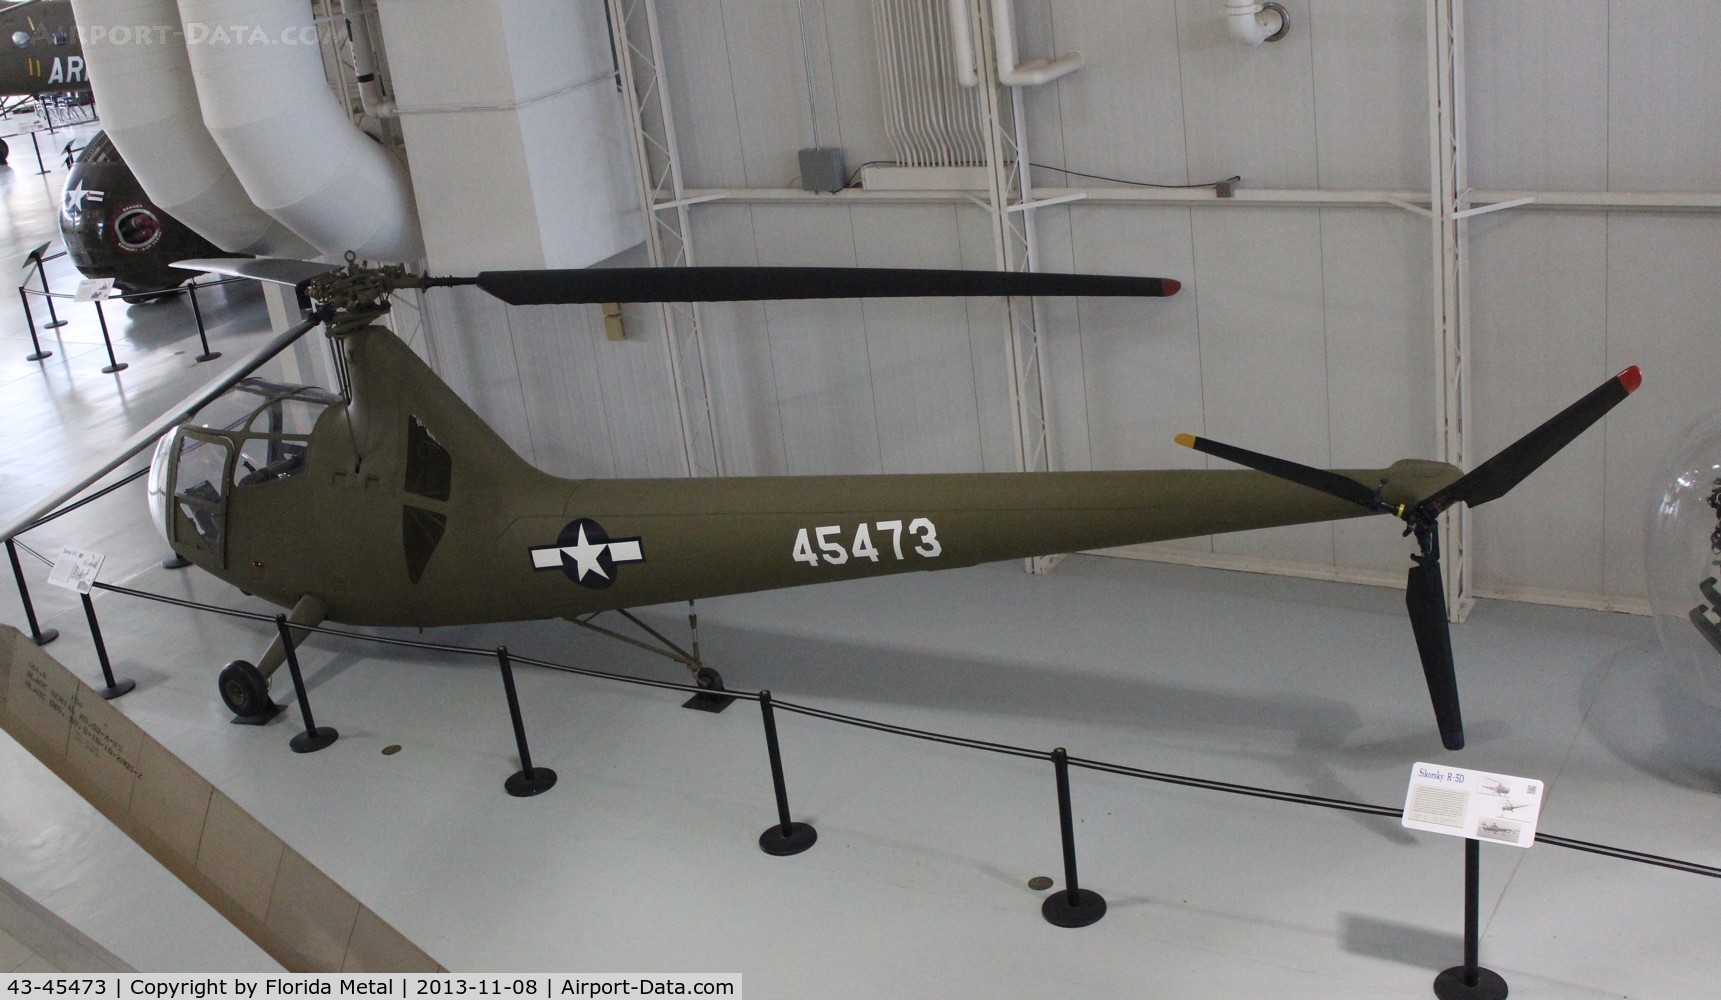 43-45473, 1944 Sikorsky R-6A Hoverfly C/N Not found 43-45473, R-6A Hoverfly at Army Aviation Museum Ft. Rucker AL